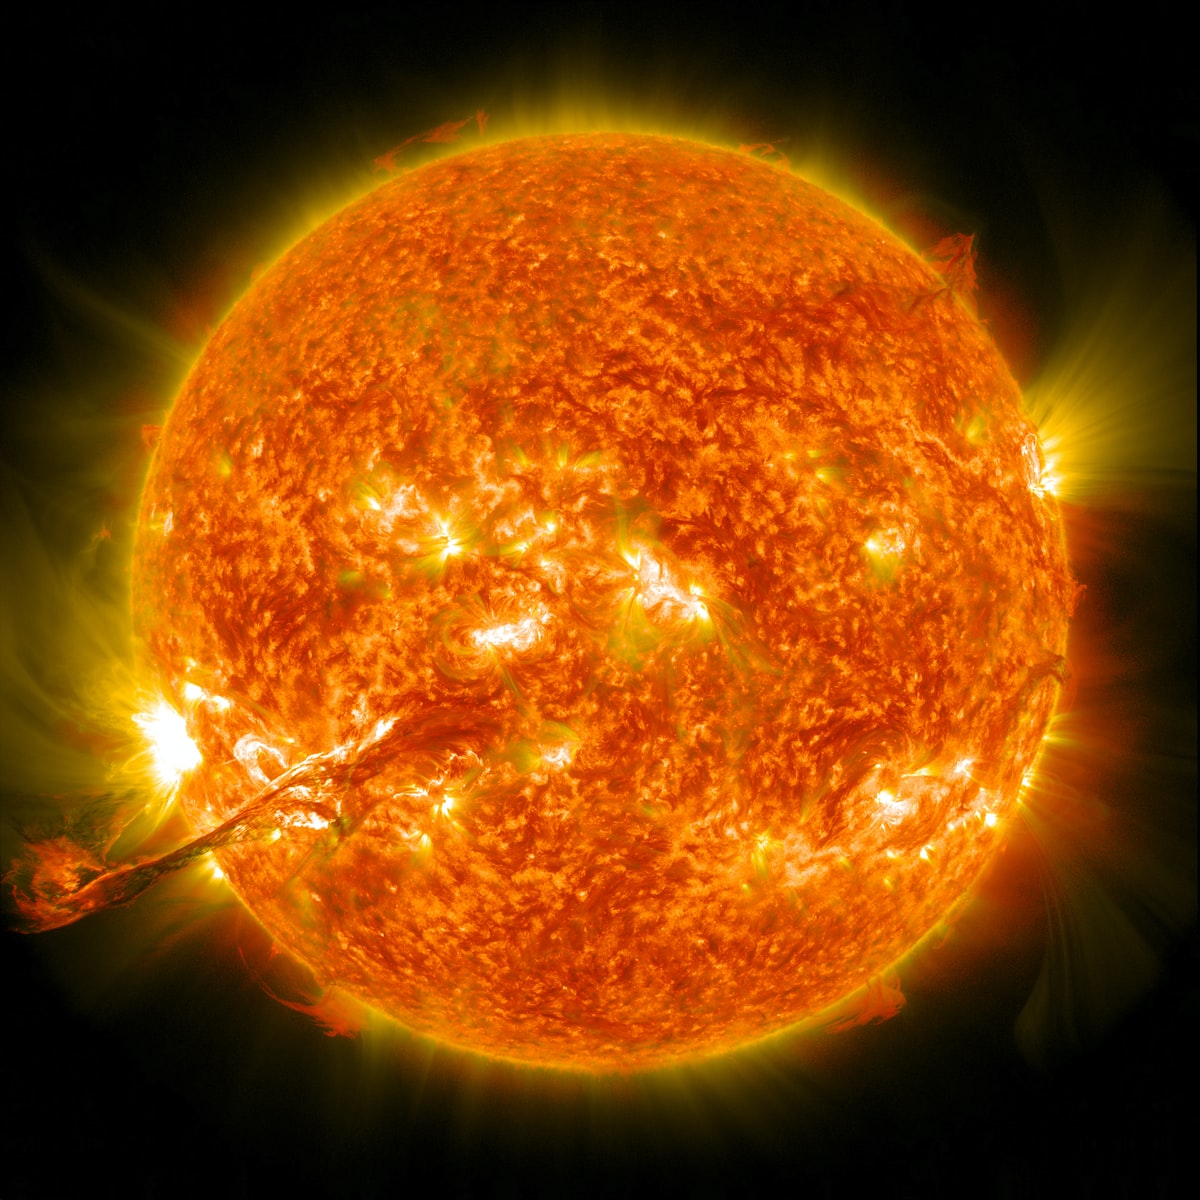 The sun with a corona mass ejection